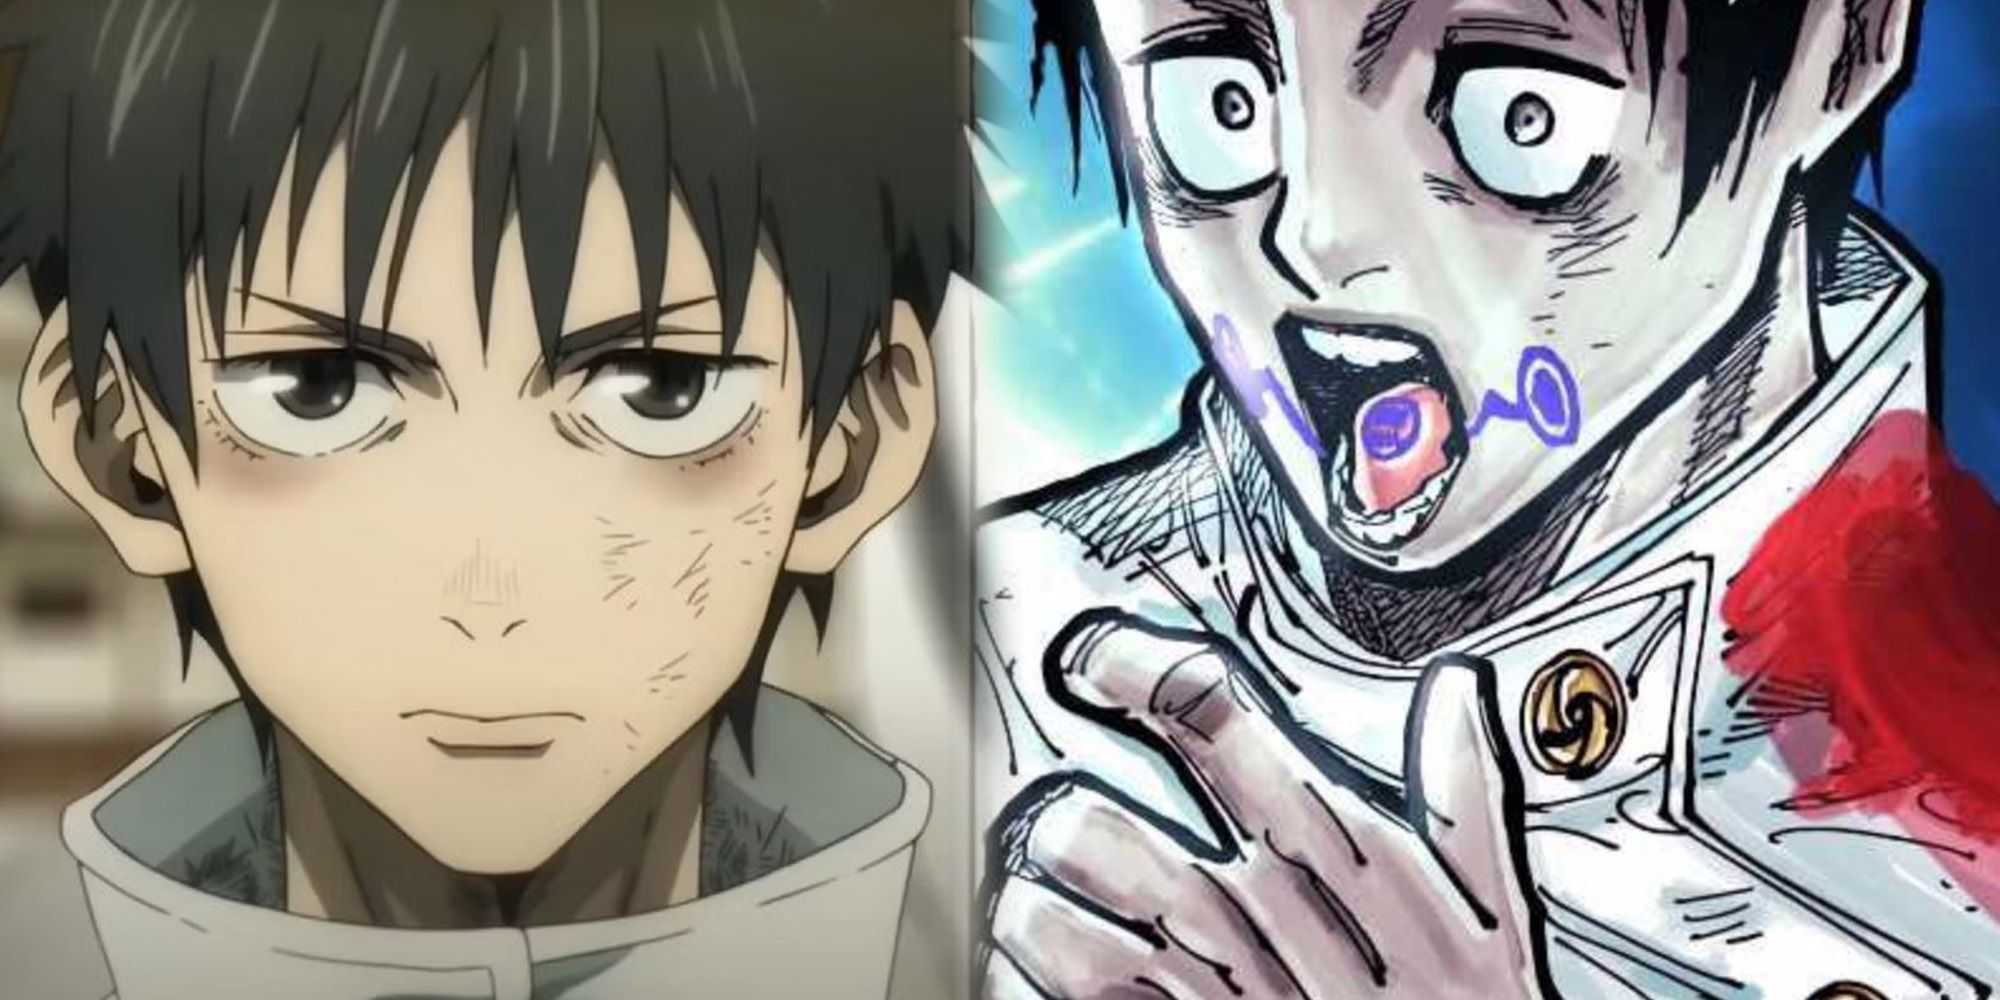 Jujutsu Kaisen - Image Of Yuta Looking Determined From JJK0 Movie Next To Panel Of Him Copying Cursed Speech Technique